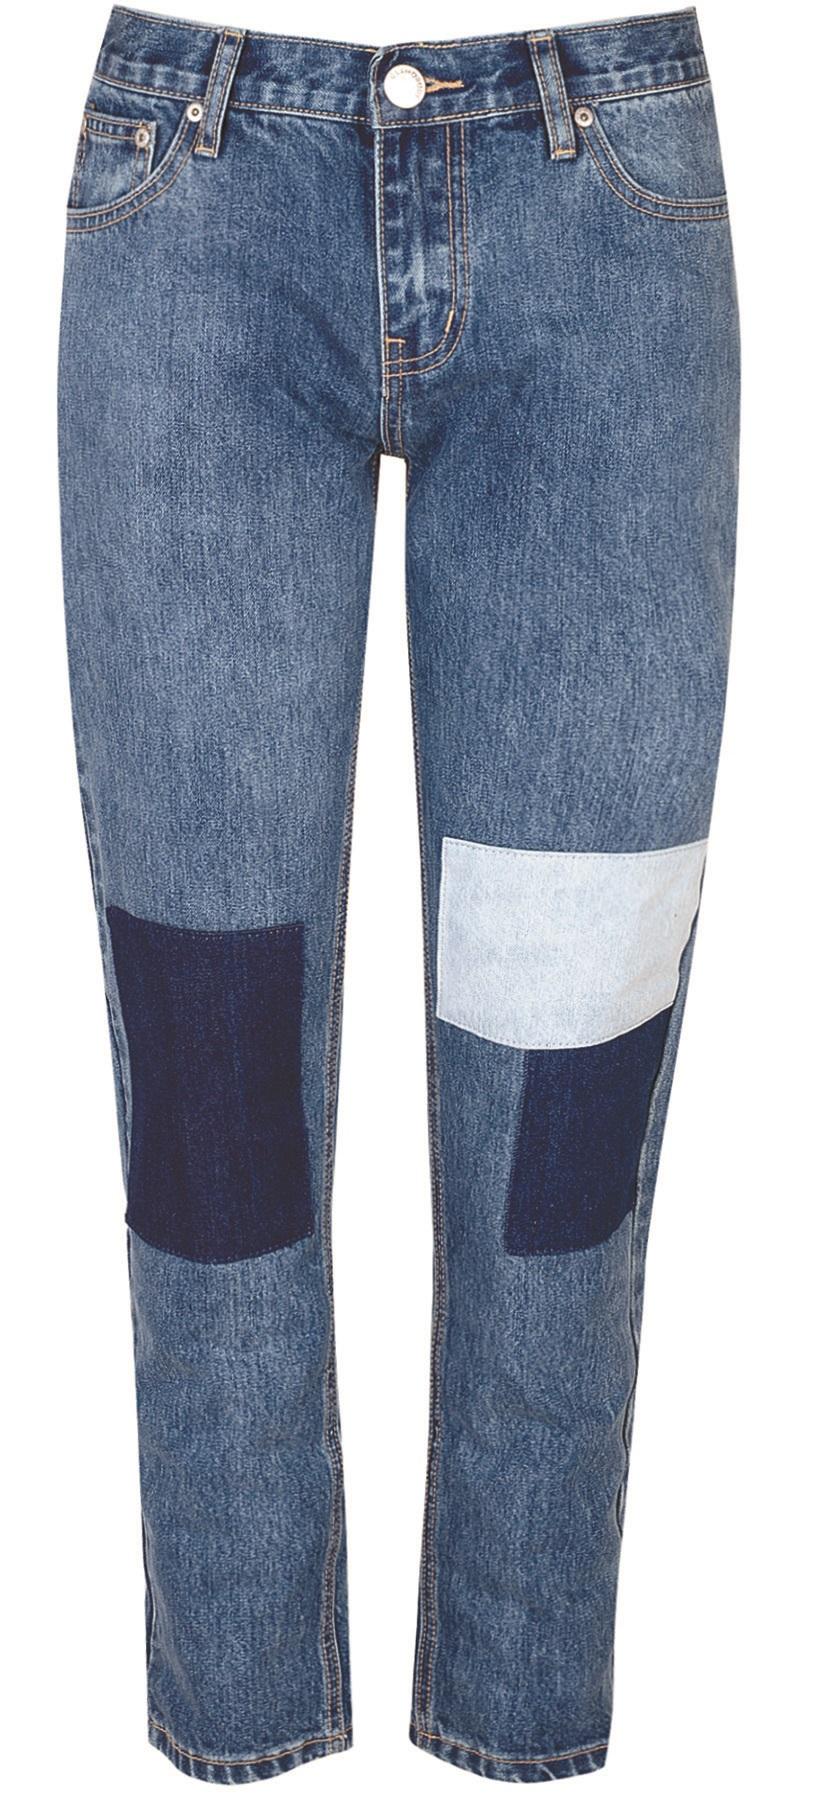 Glamorous, Mid Blue Patchwork Jeans, £36